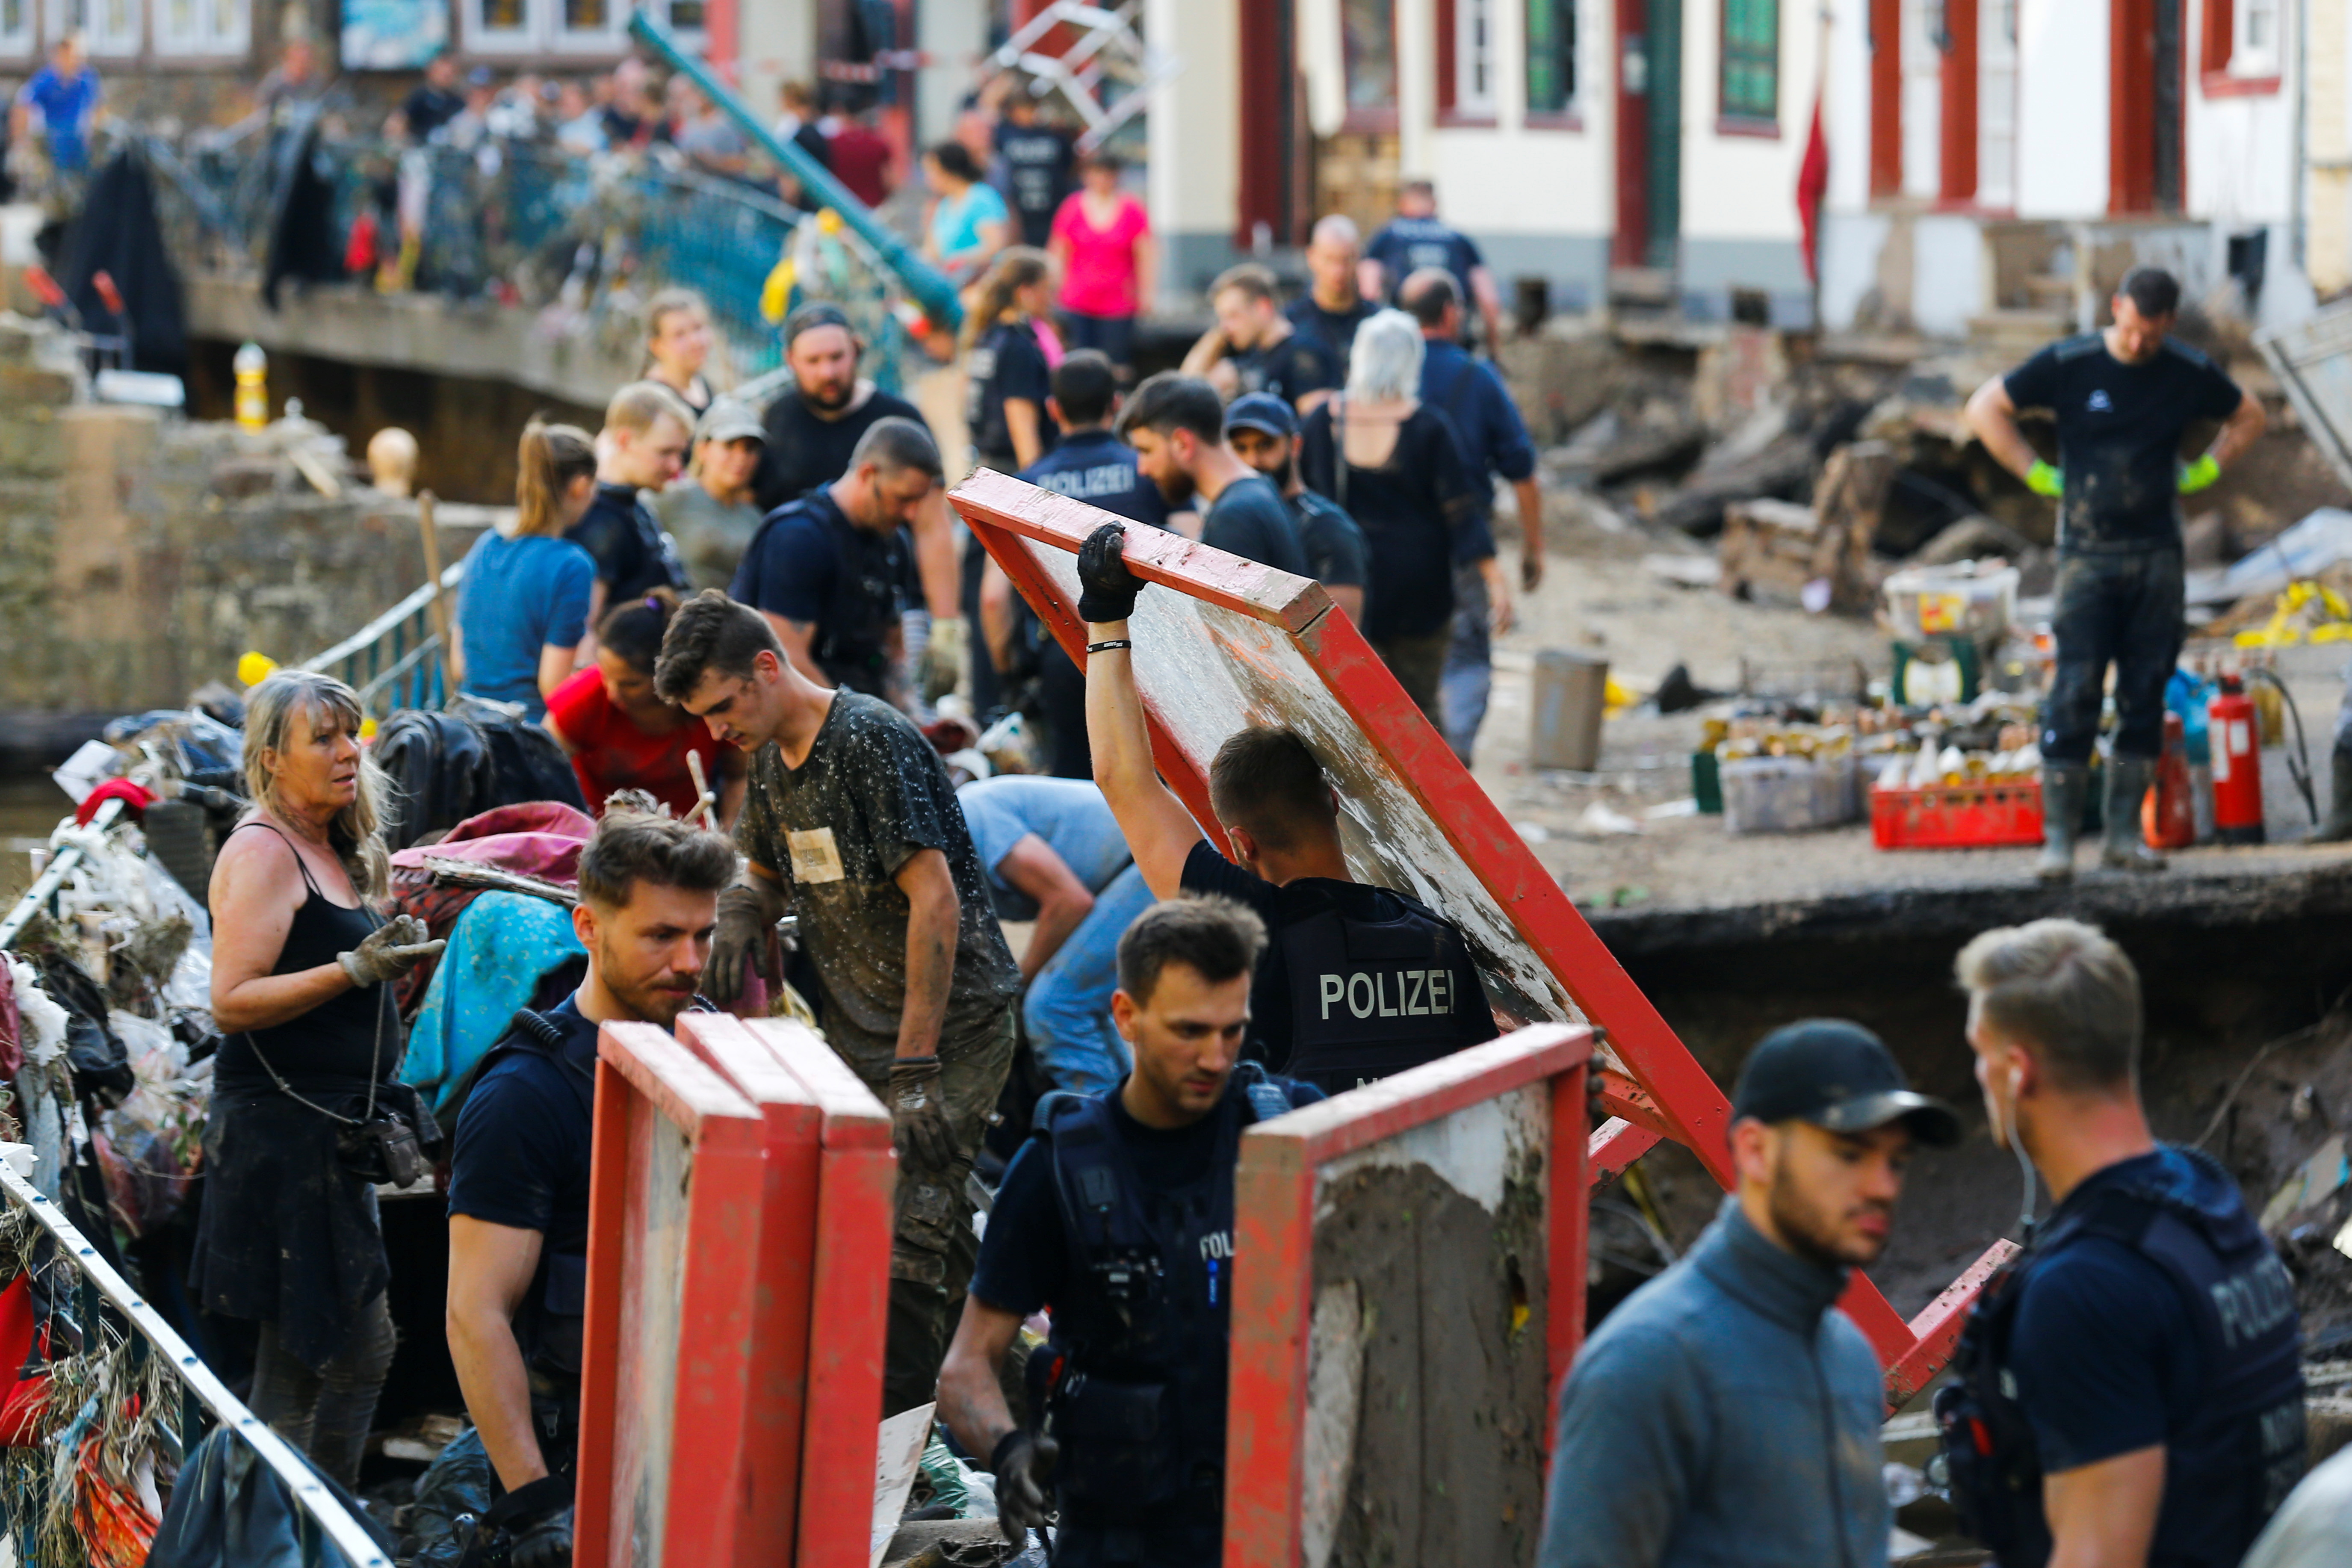 Police officers and volunteers clean rubble in an area affected by floods caused by heavy rainfalls in Bad Muenstereifel, Germany, July 18, 2021. REUTERS/Thilo Schmuelgen